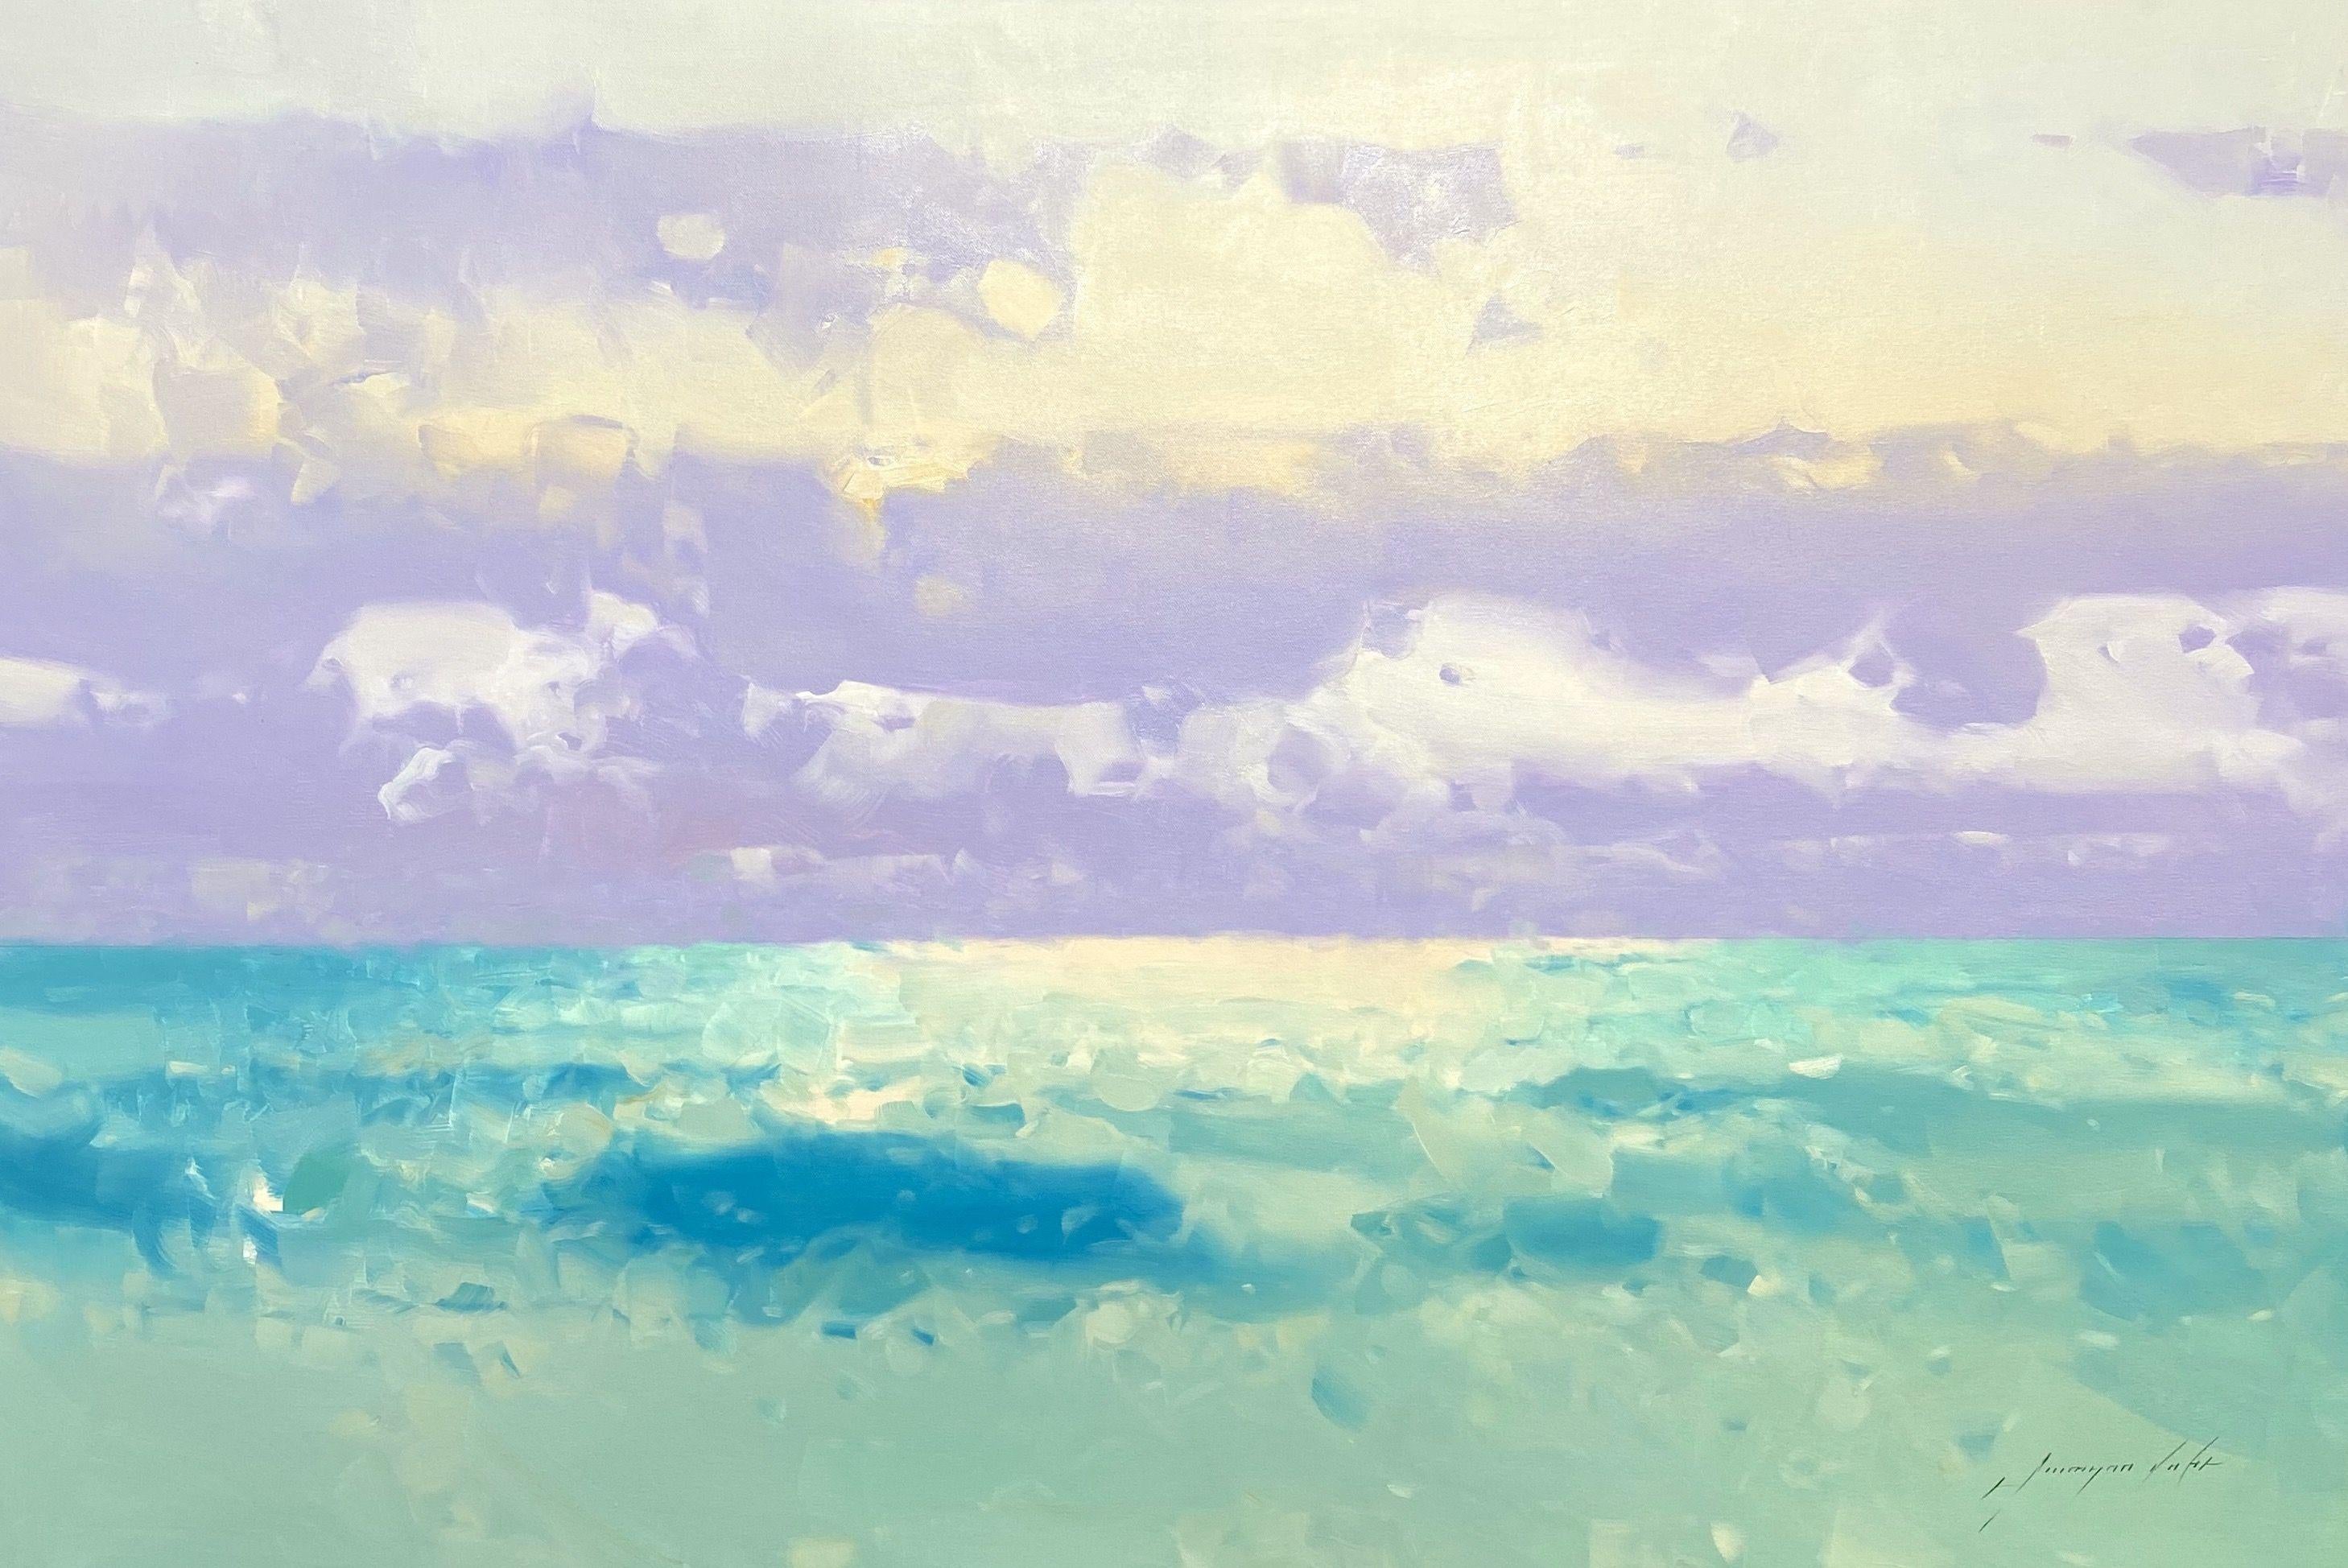 Artist: Vahe Yeremyan   Work: Original Oil Painting, Handmade Artwork, One of a Kind   Medium: Oil on Canvas   Year: 2021  Style: Impressionism,   Subject: Turquoise Ocean,  Size: 30" x 45" x 1'' inch, 76x114x3 cm,   Unframed, Stretched on Wooden